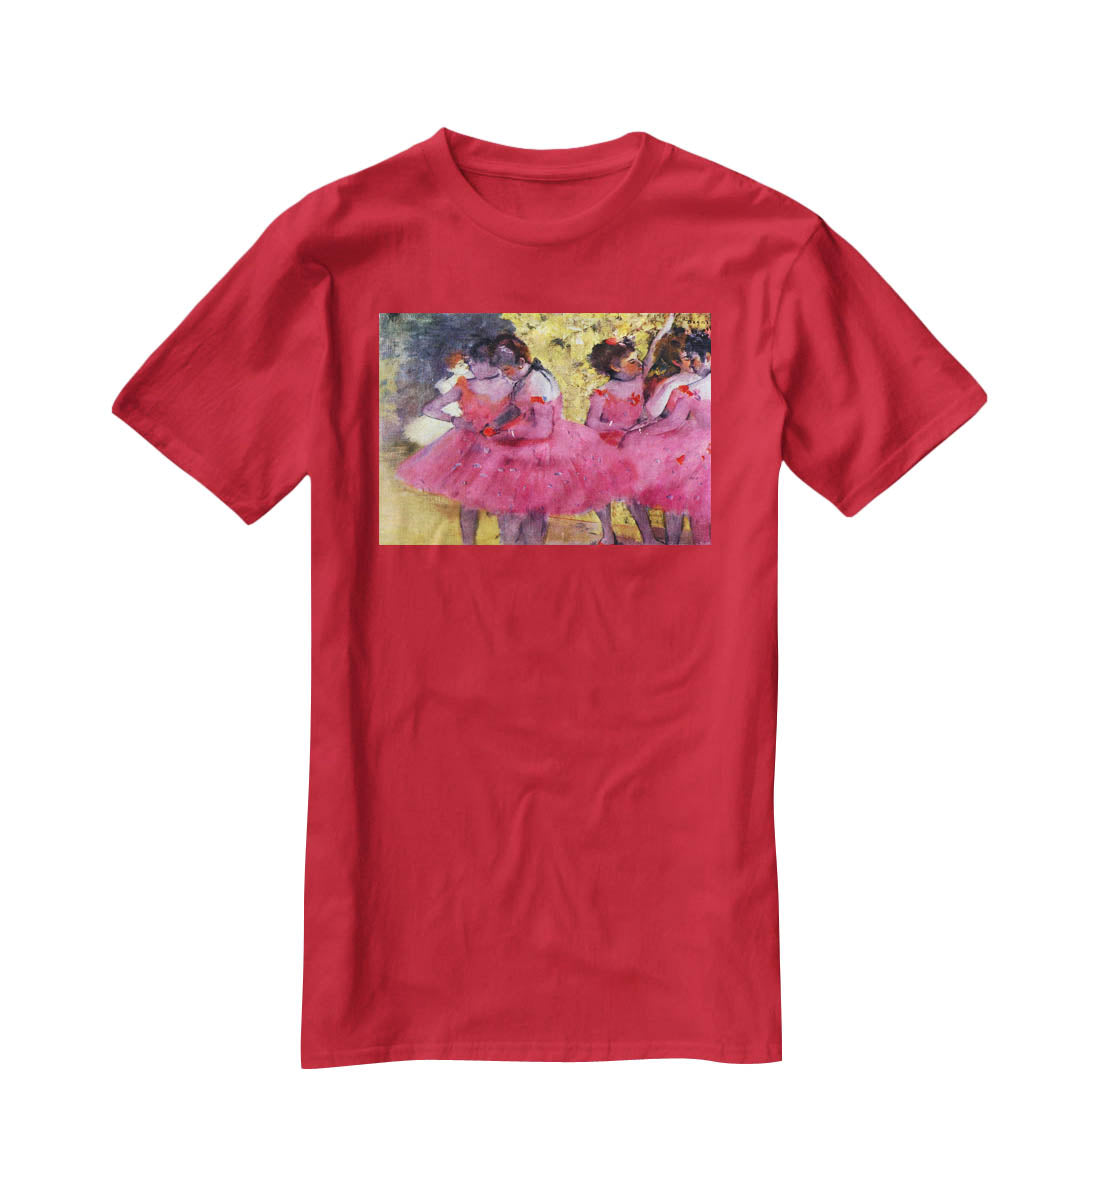 Dancers in pink between the scenes by Degas T-Shirt - Canvas Art Rocks - 4